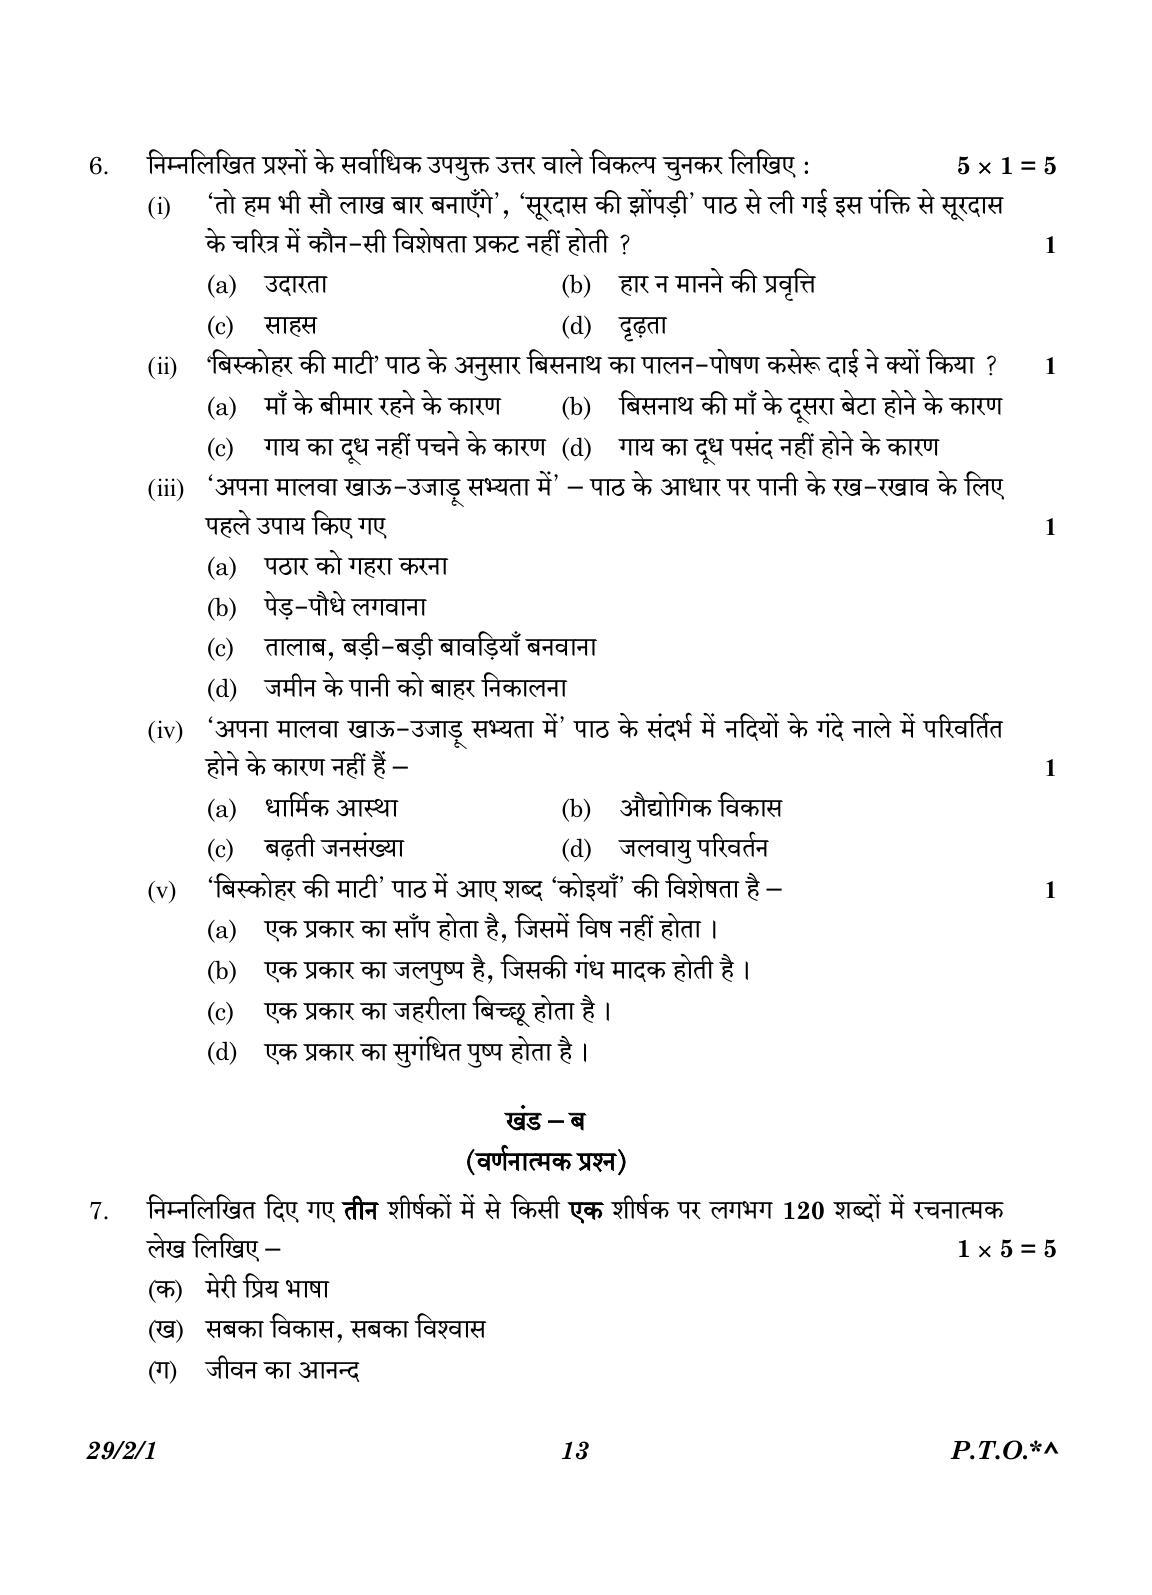 CBSE Class 12 29-2-1 Hindi Elective 2023 Question Paper - Page 13